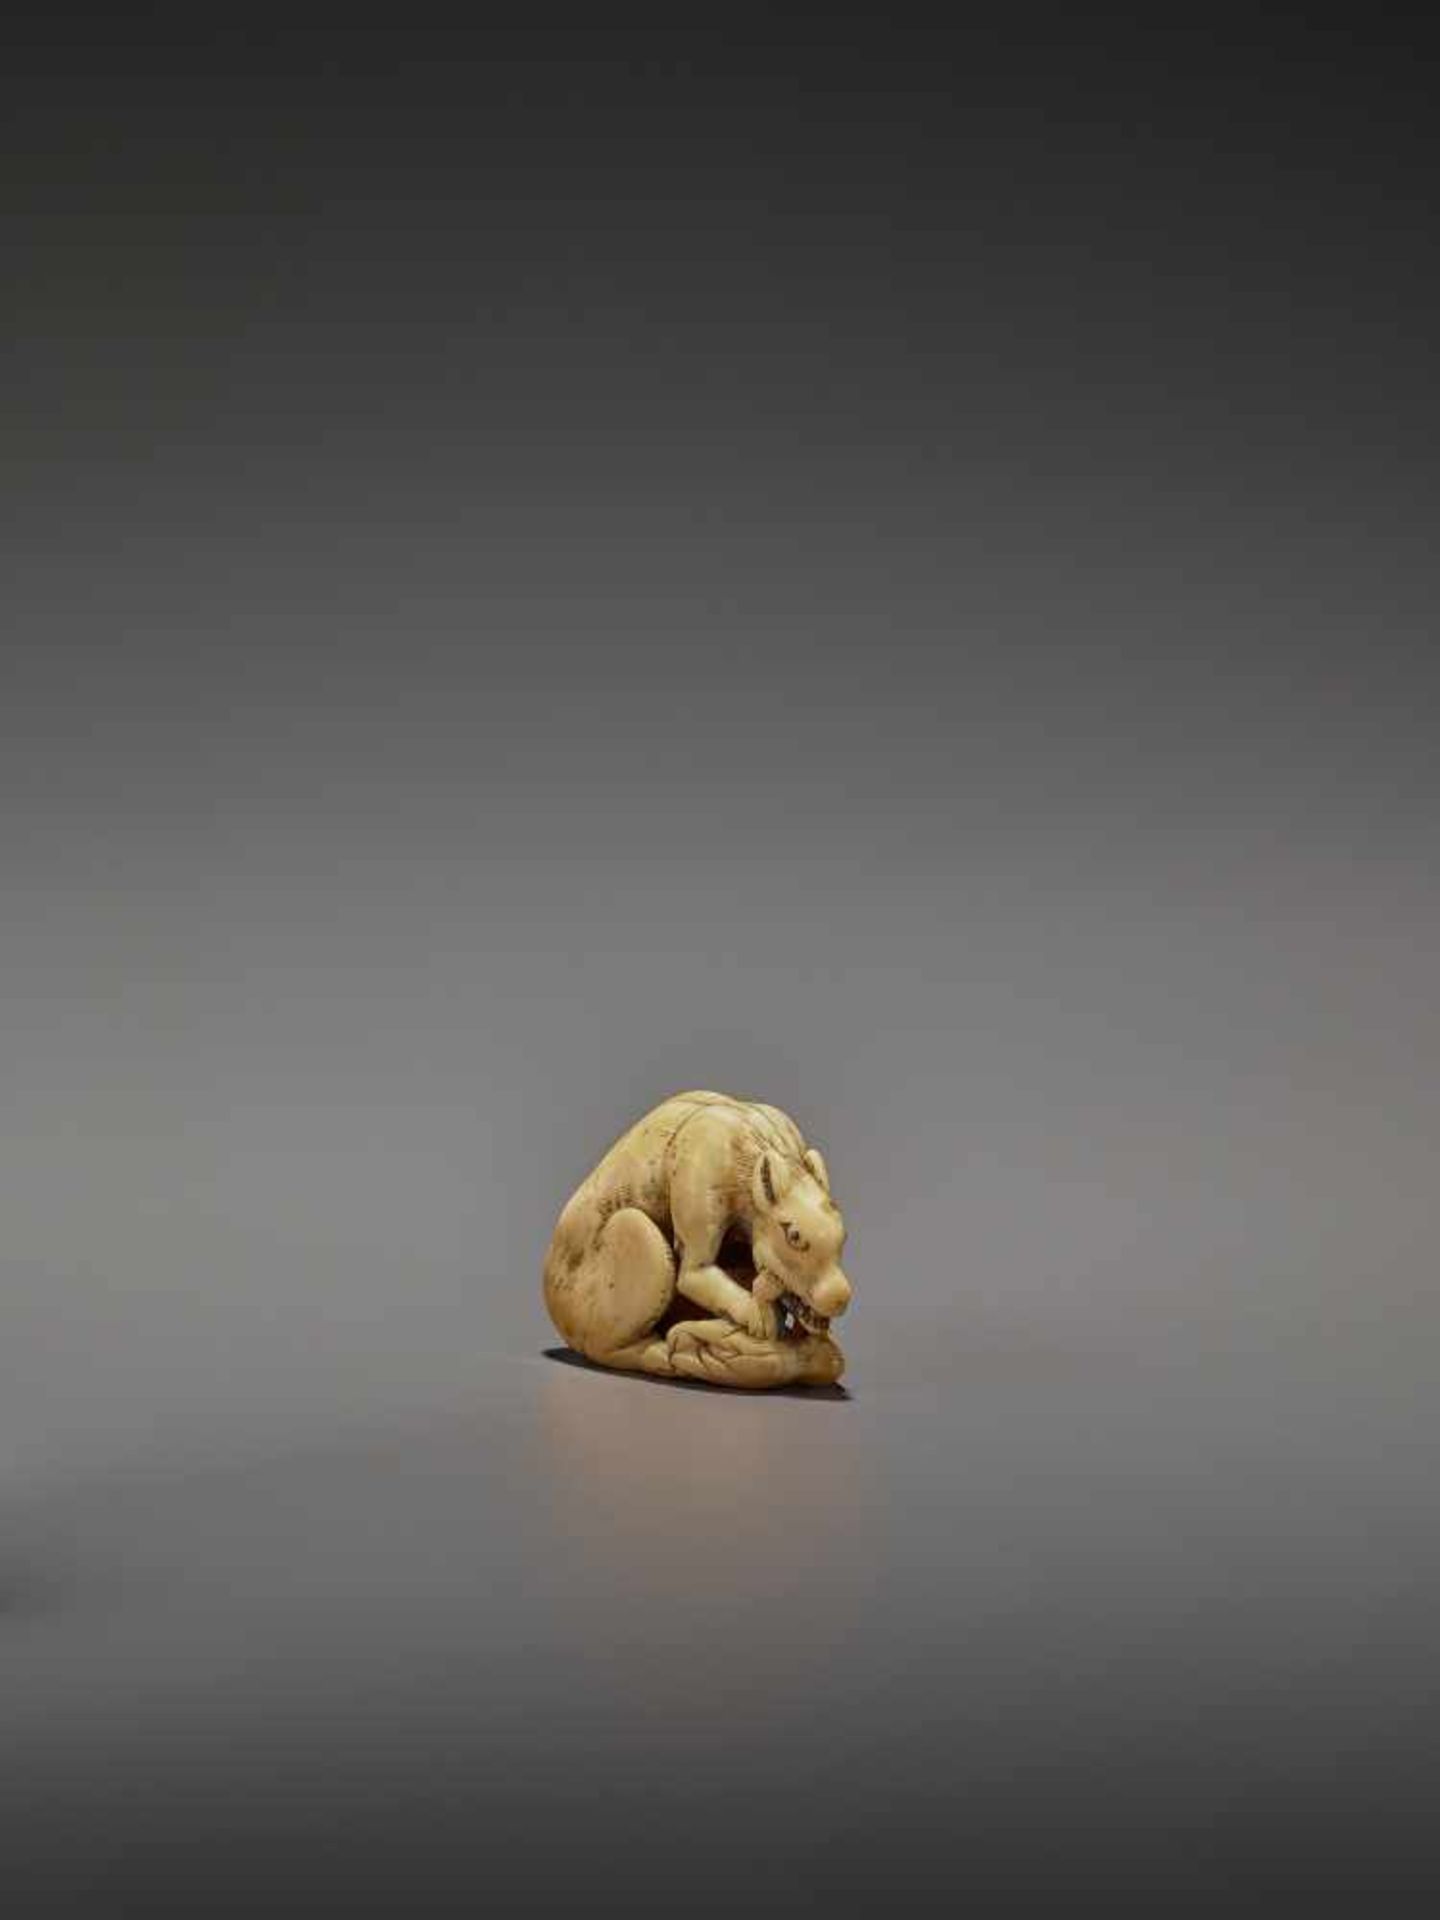 AN EARLY IVORY NETSUKE OF A WOLF WITH HAUNCH UnsignedJapan, Kyoto, 18th century, Edo period (1615-